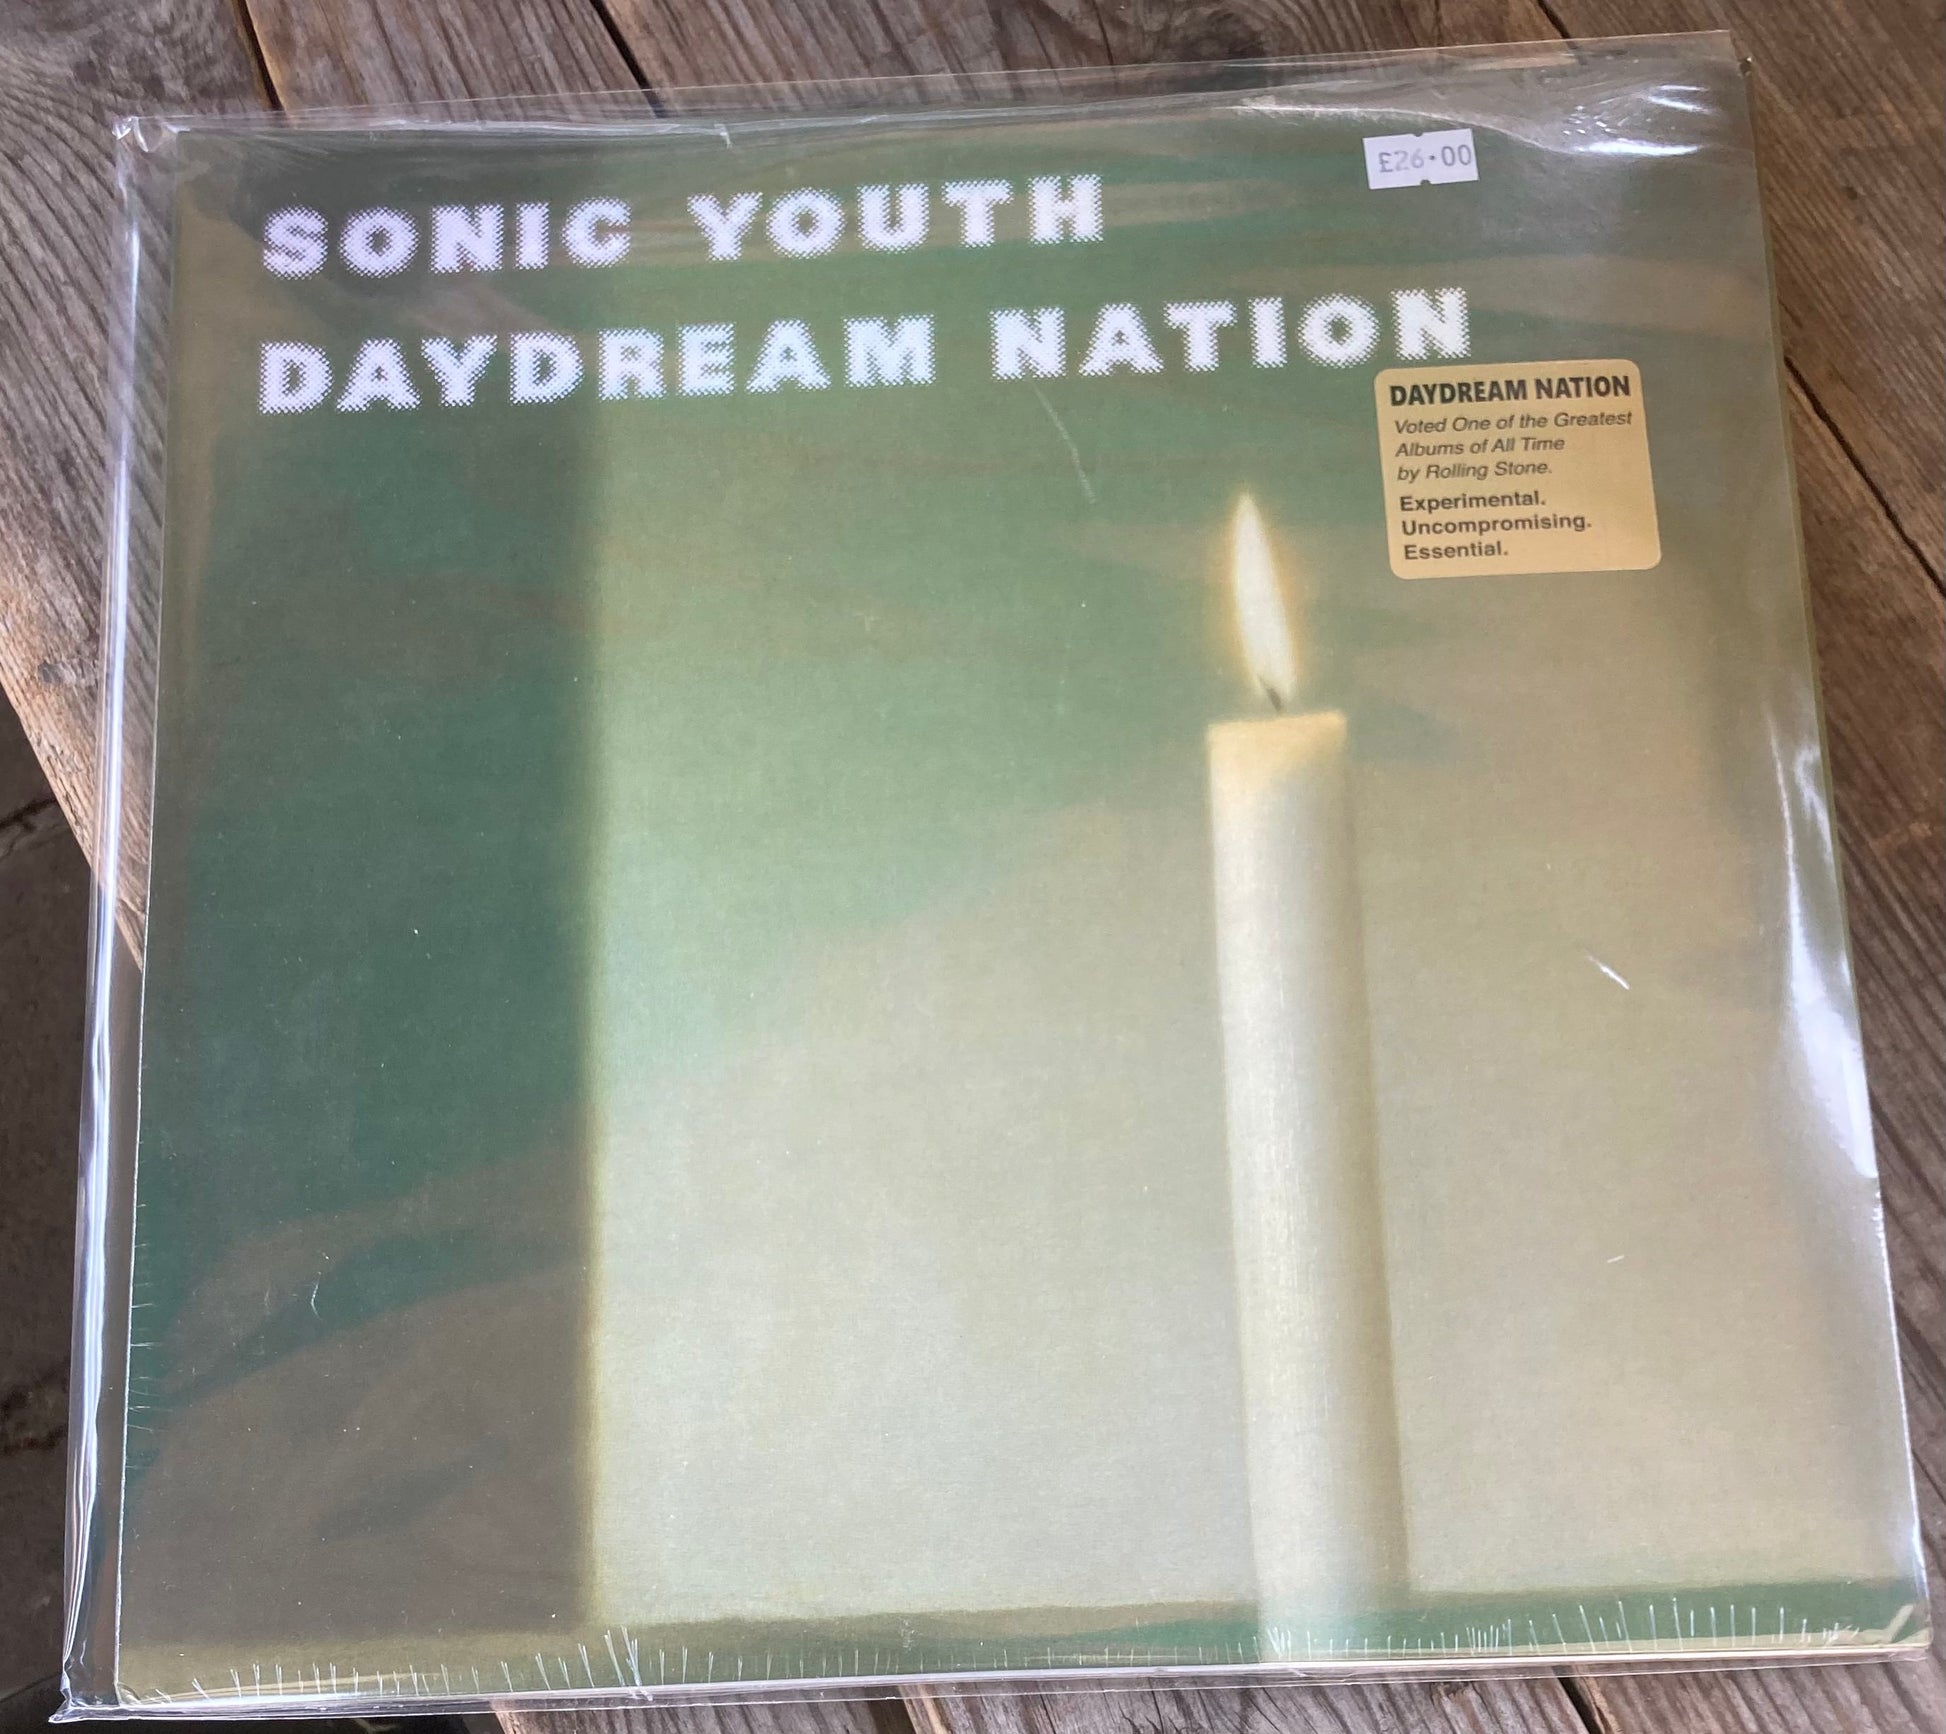 The front of 'Sonic Youth - Daydream Nation' on vinyl